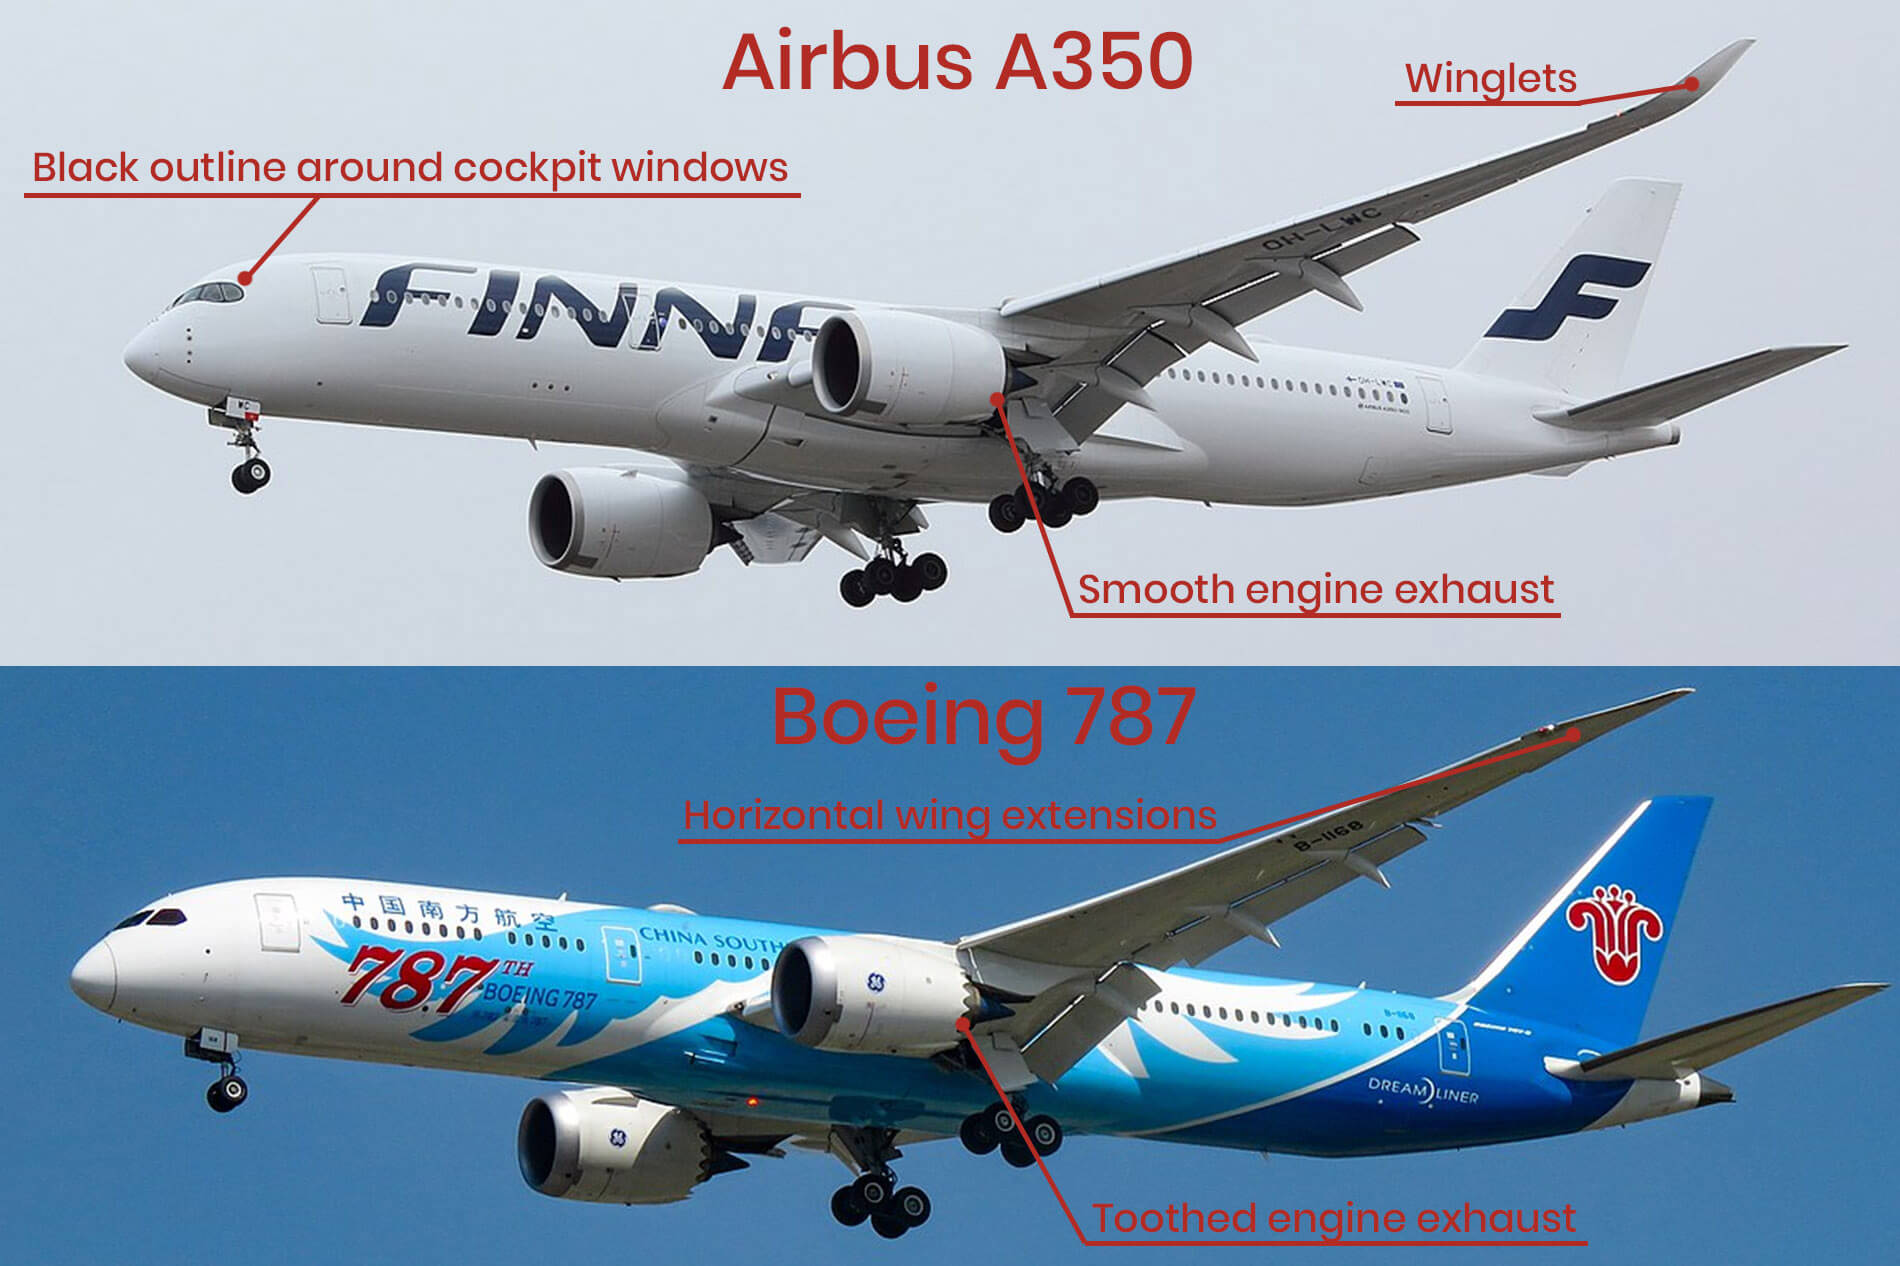 Airbus A350 Boeing 787 spotting guide